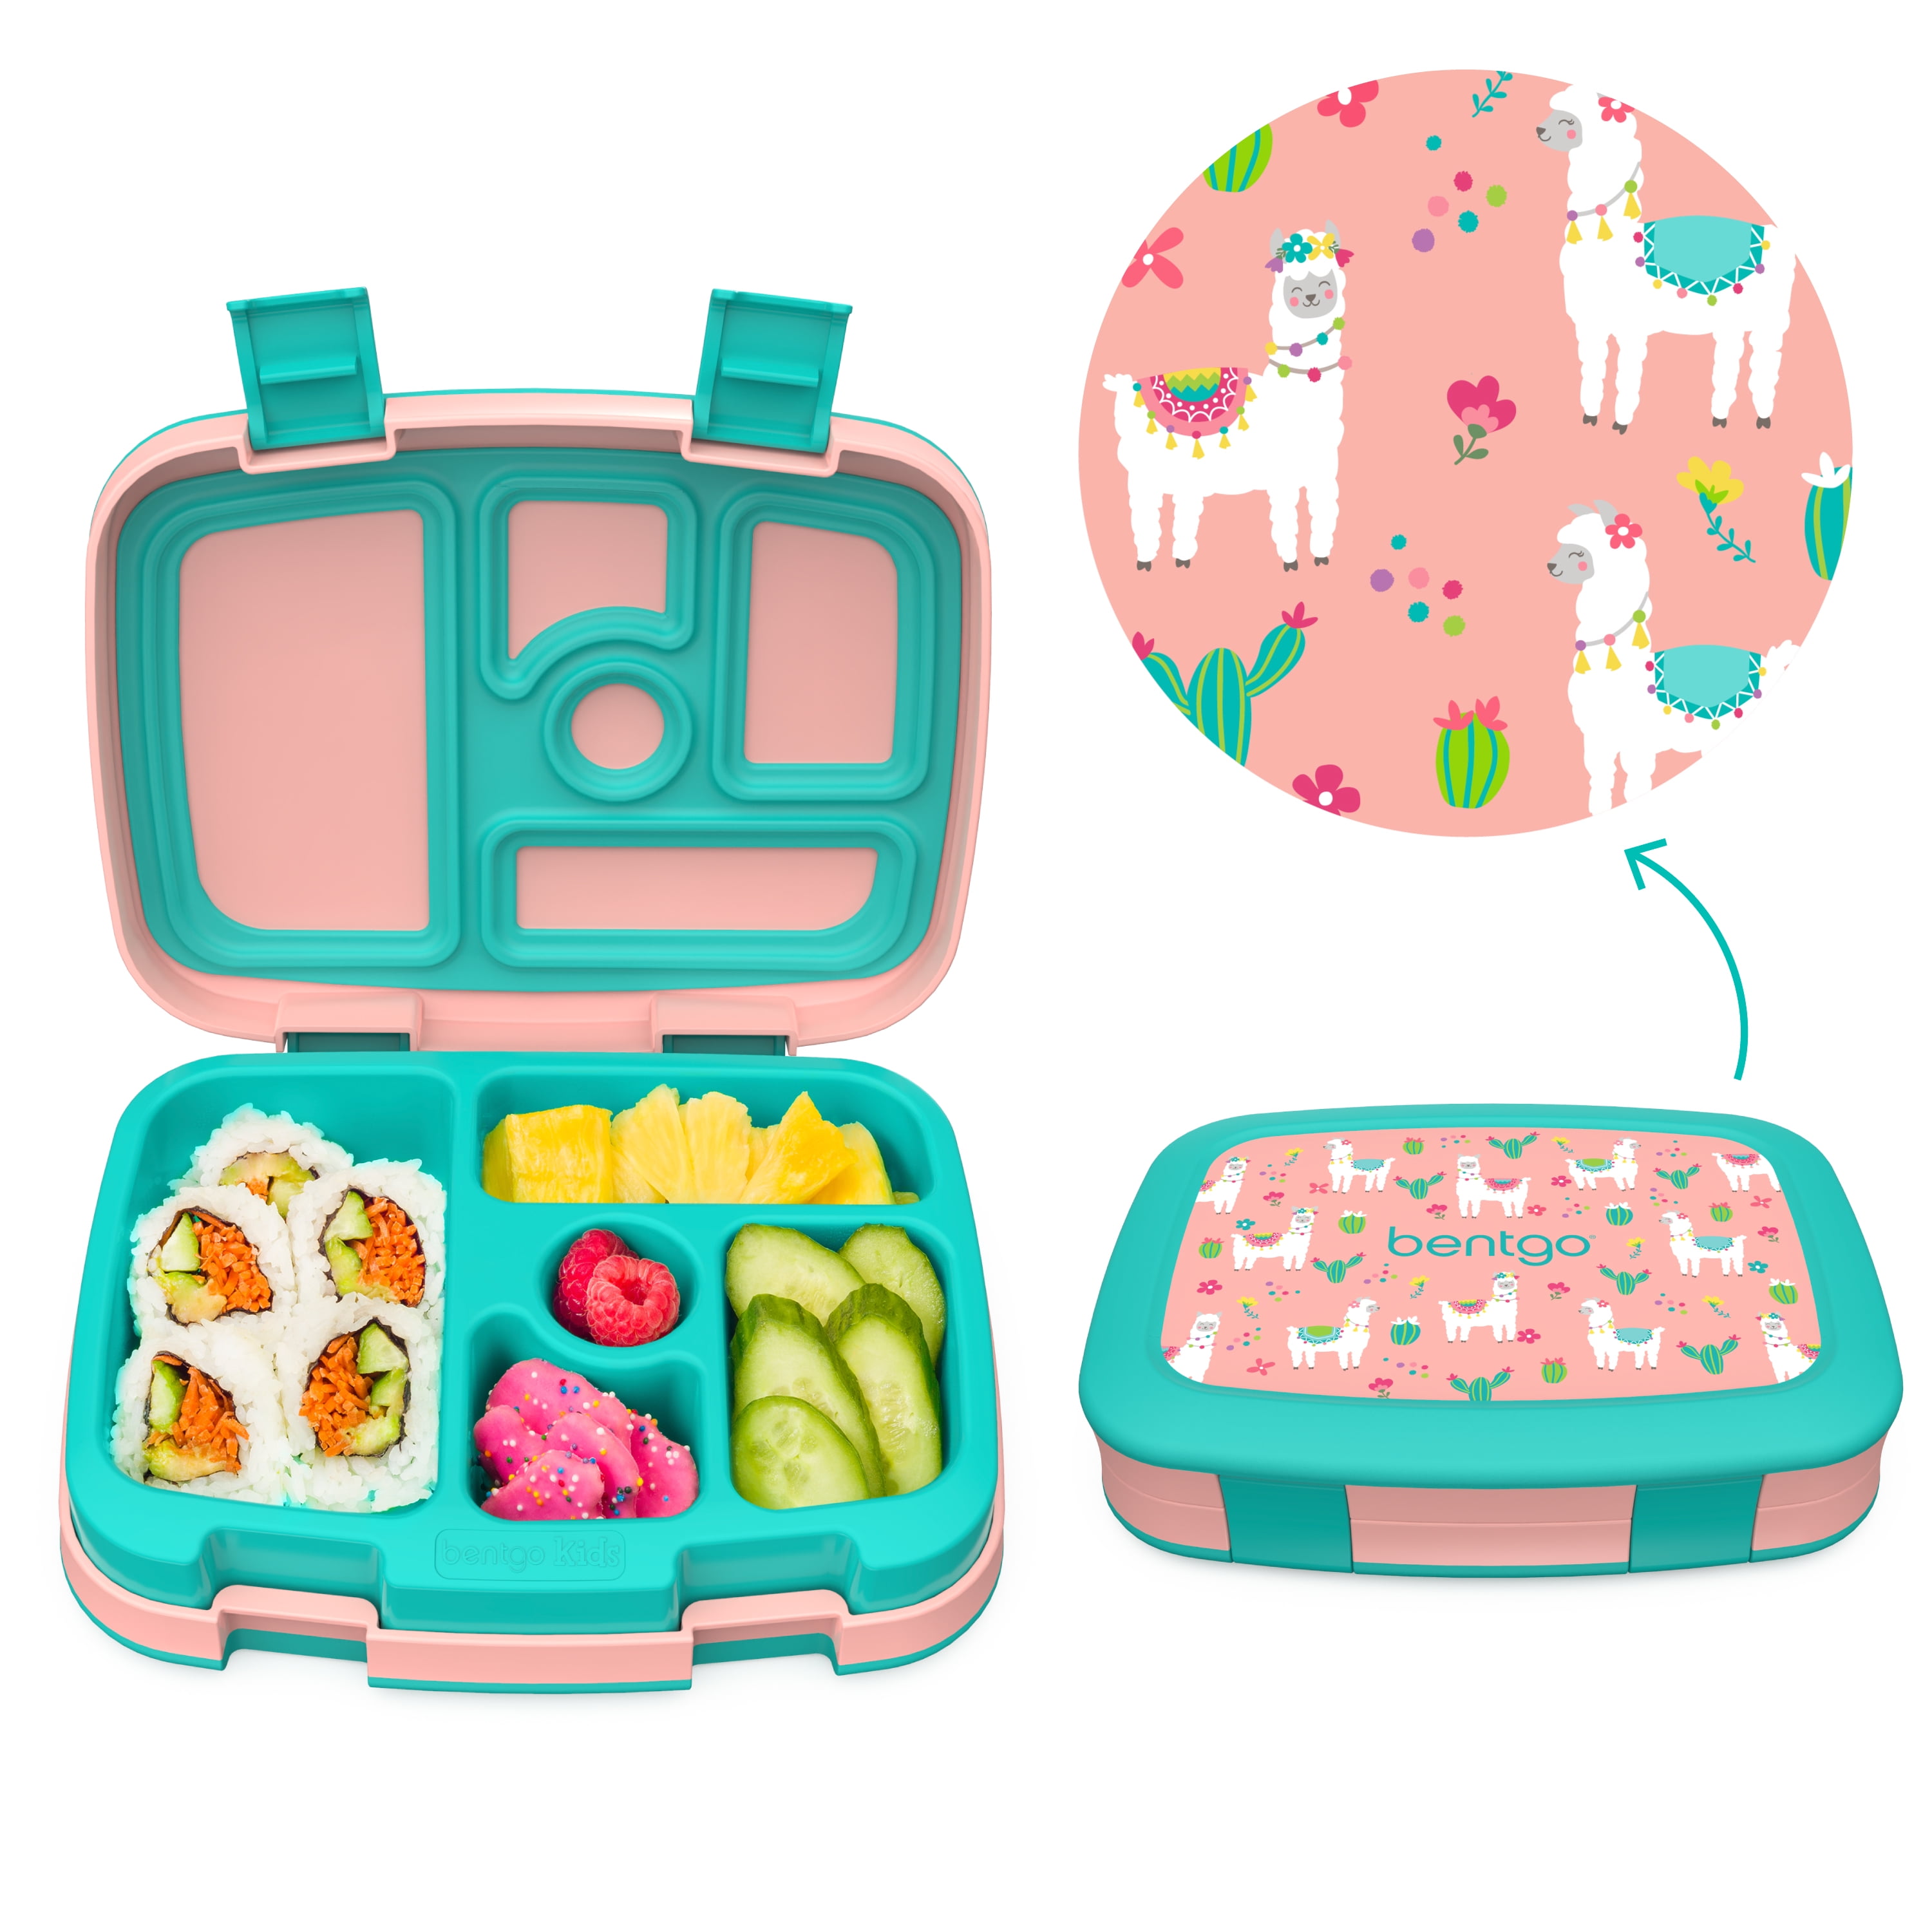 5-Compartment Bento-Style Kids Lunch Box Camouflage - Leak-Proof Ideal Portion Sizes for Ages 3 to 7 Bentgo Kids Prints BPA-Free and Food-Safe Materials 